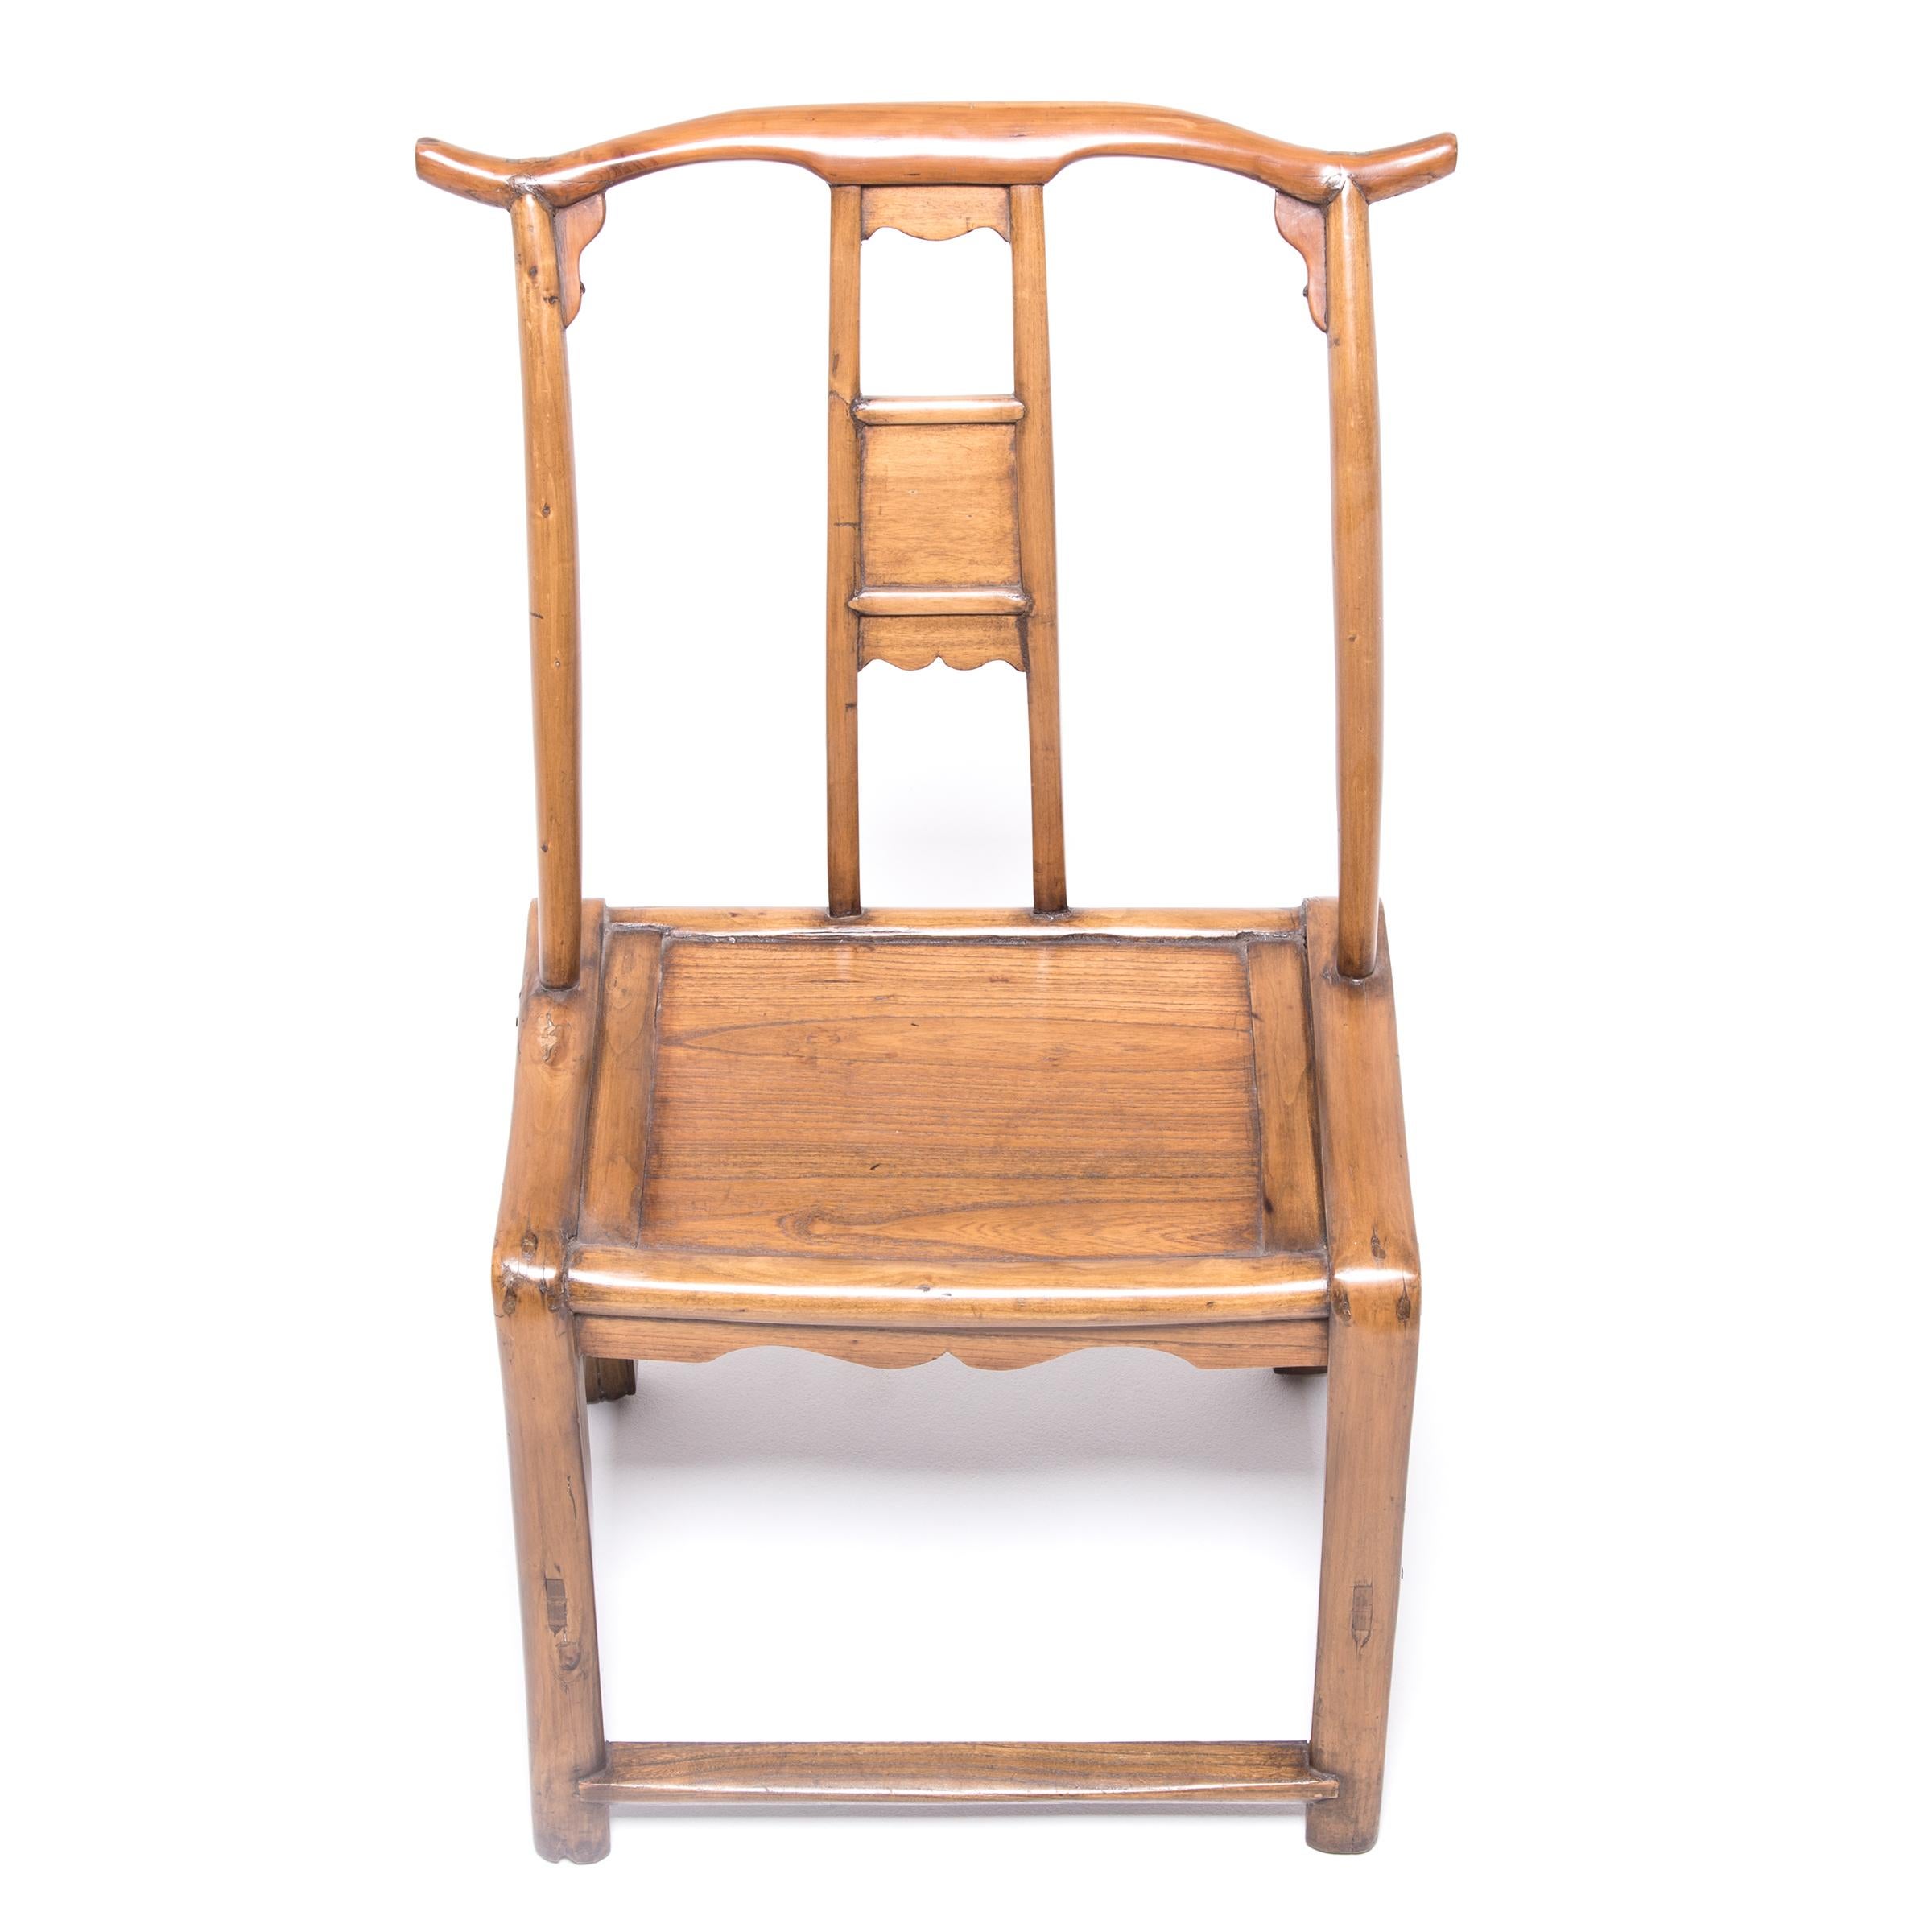 Cypress Pair of Chinese Provincial Bentform Chairs, c. 1850 For Sale